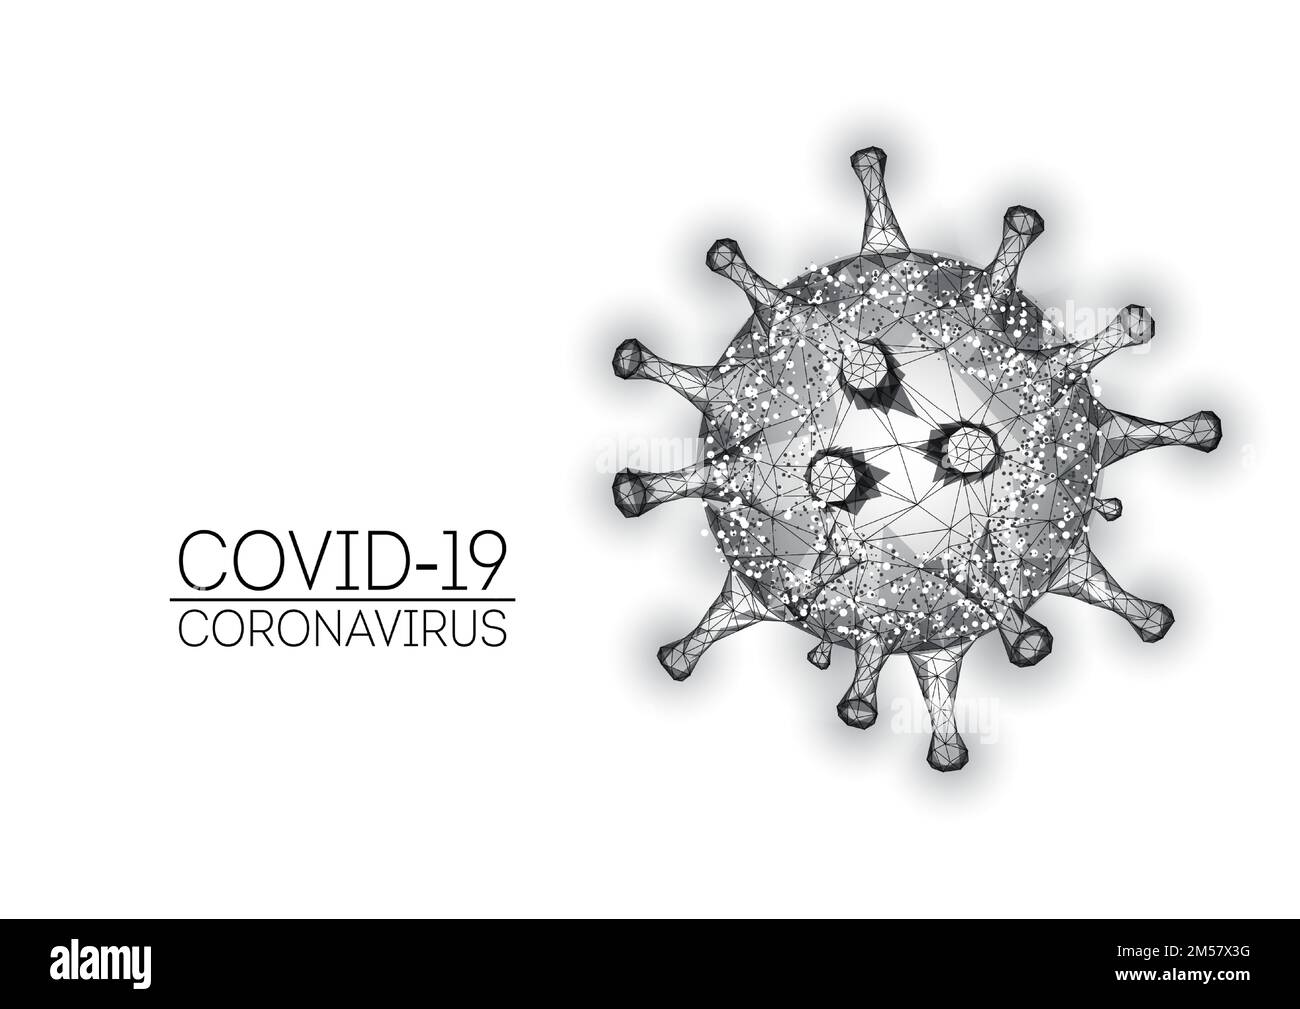 Coronavirus covid-19 cell isolated on white background. Viral infection outbreak, pandemic warning concept. Modern low polygonal wire frame mesh desig Stock Vector